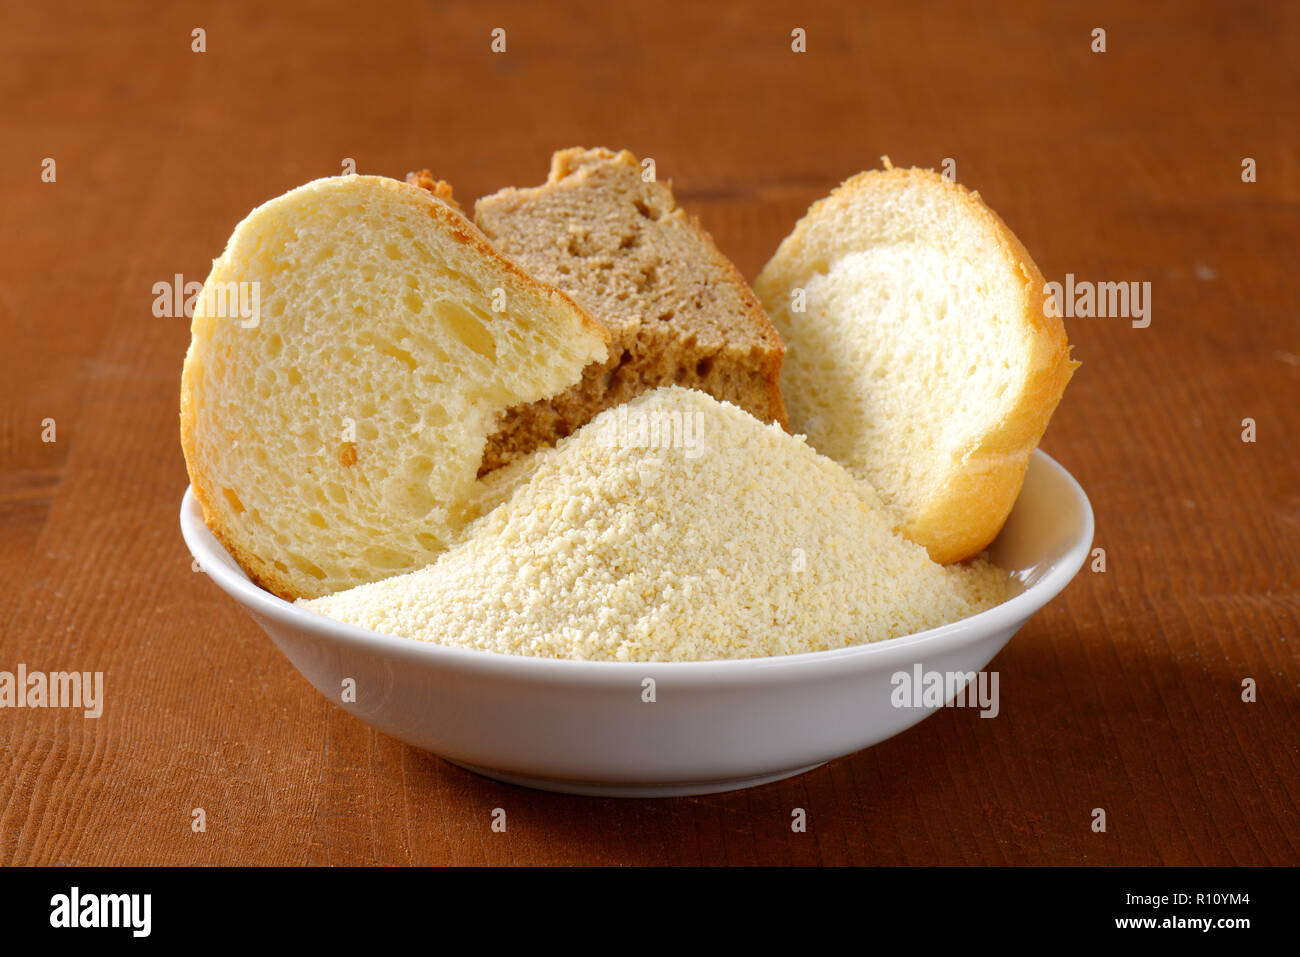 Stale bread and finely ground breadcrumbs Stock Photo